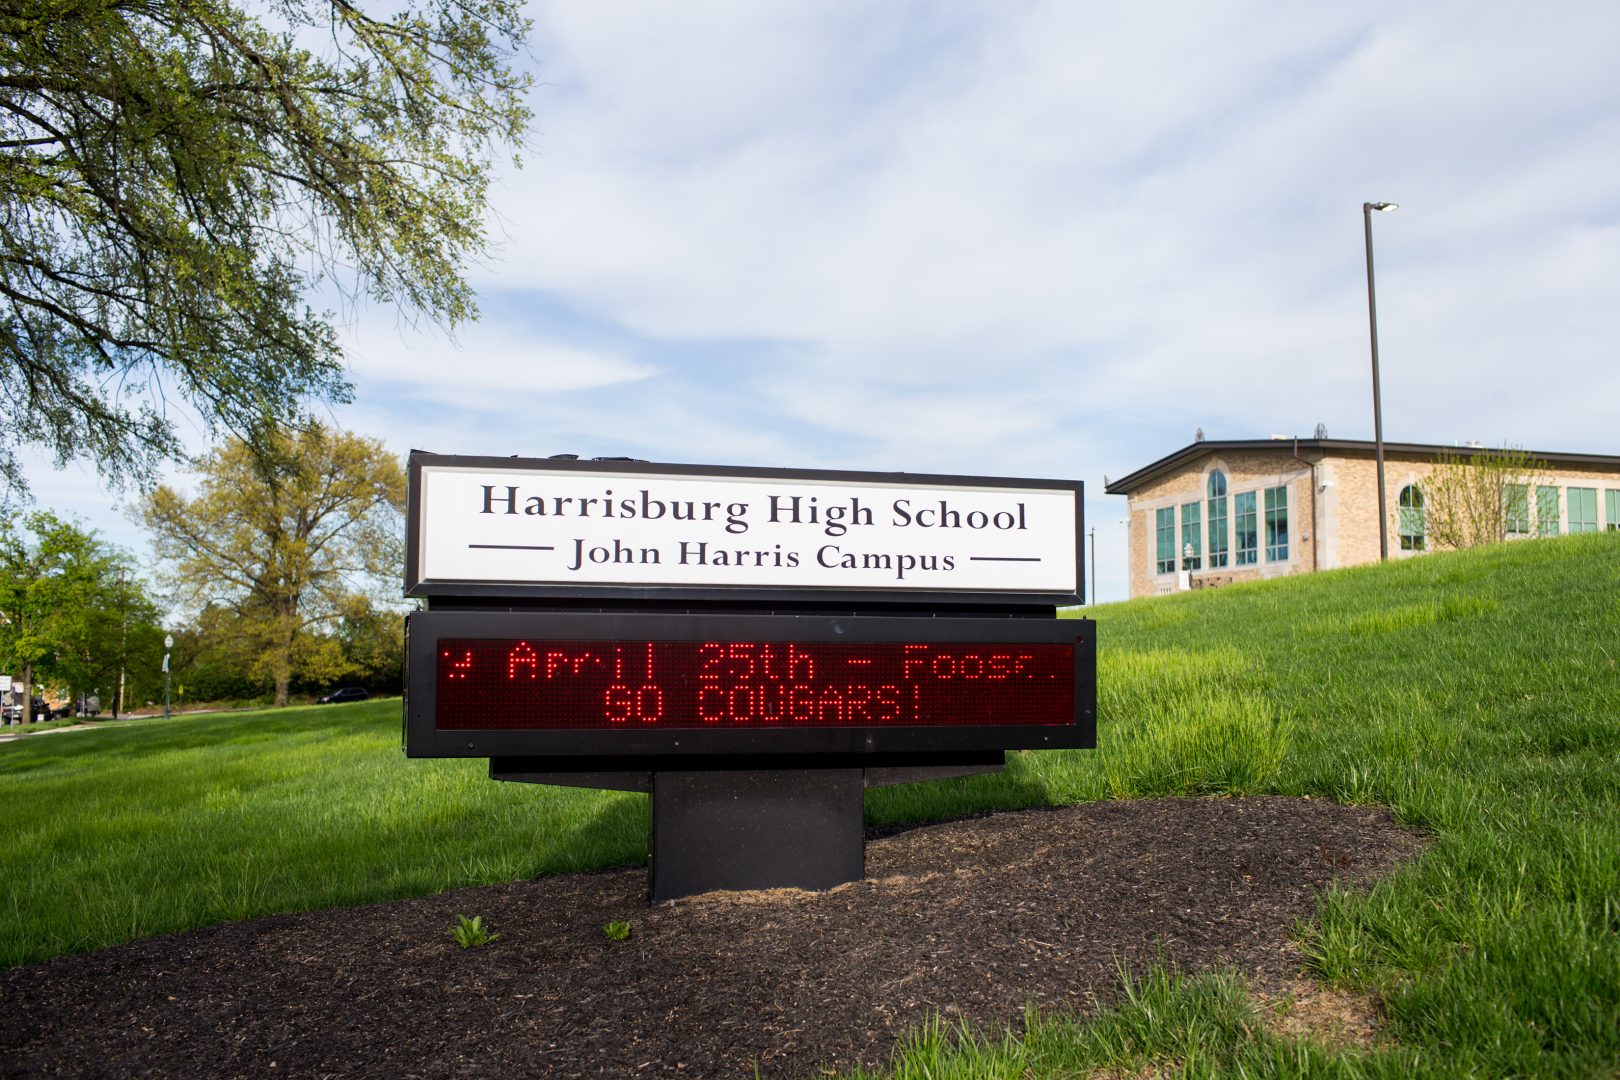 Harrisburg High School is seen in this April 24, 2019 photo.